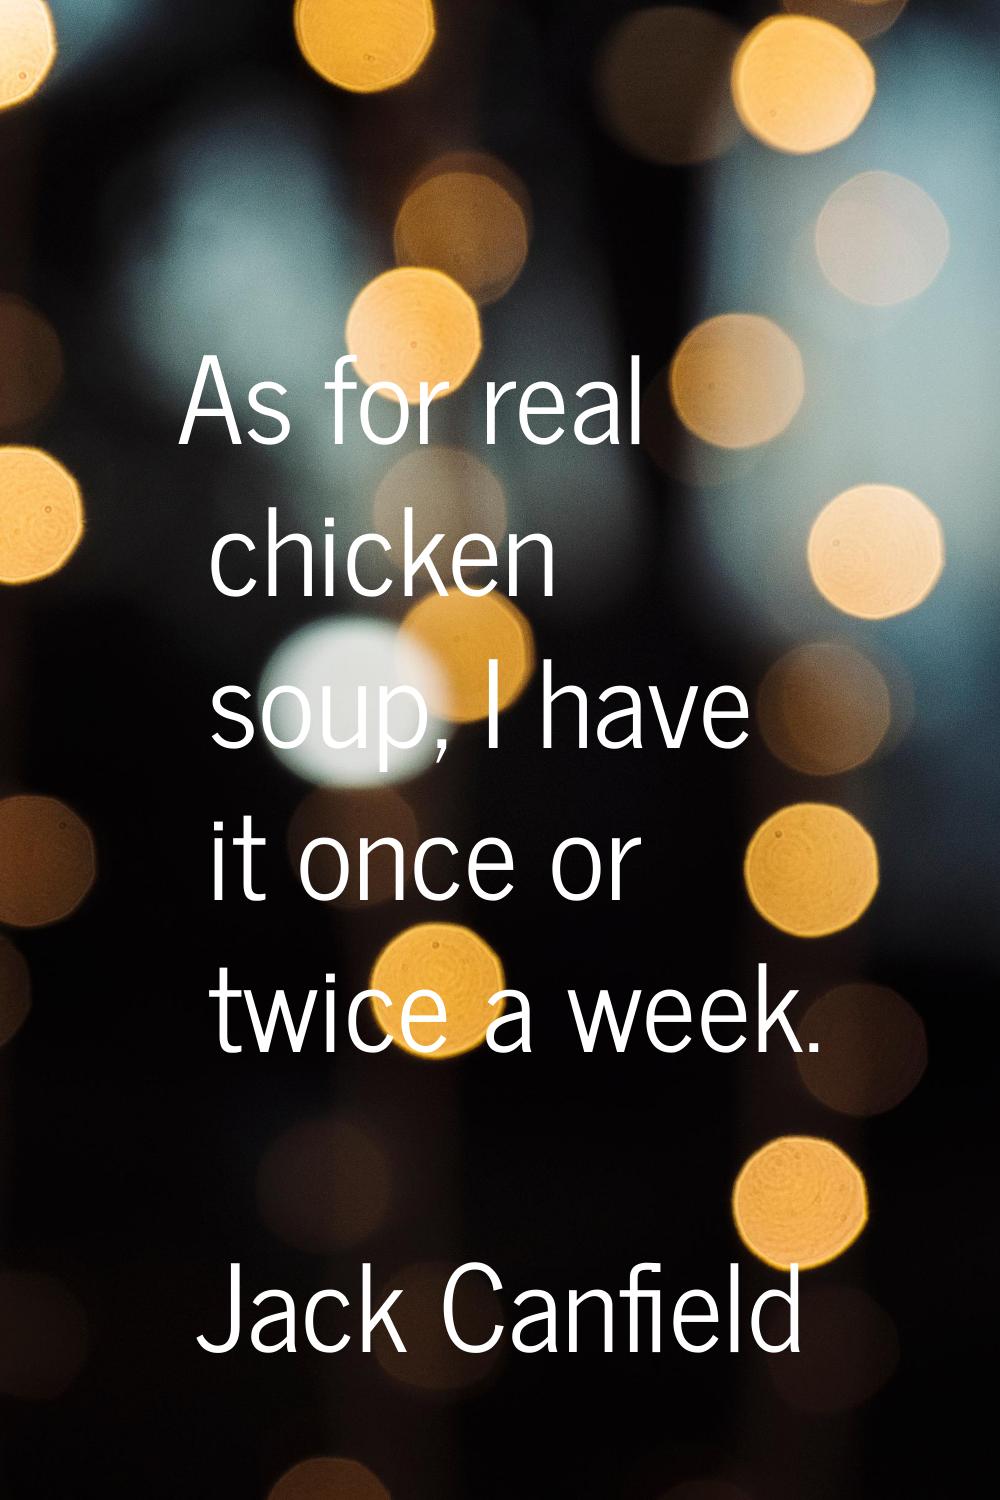 As for real chicken soup, I have it once or twice a week.